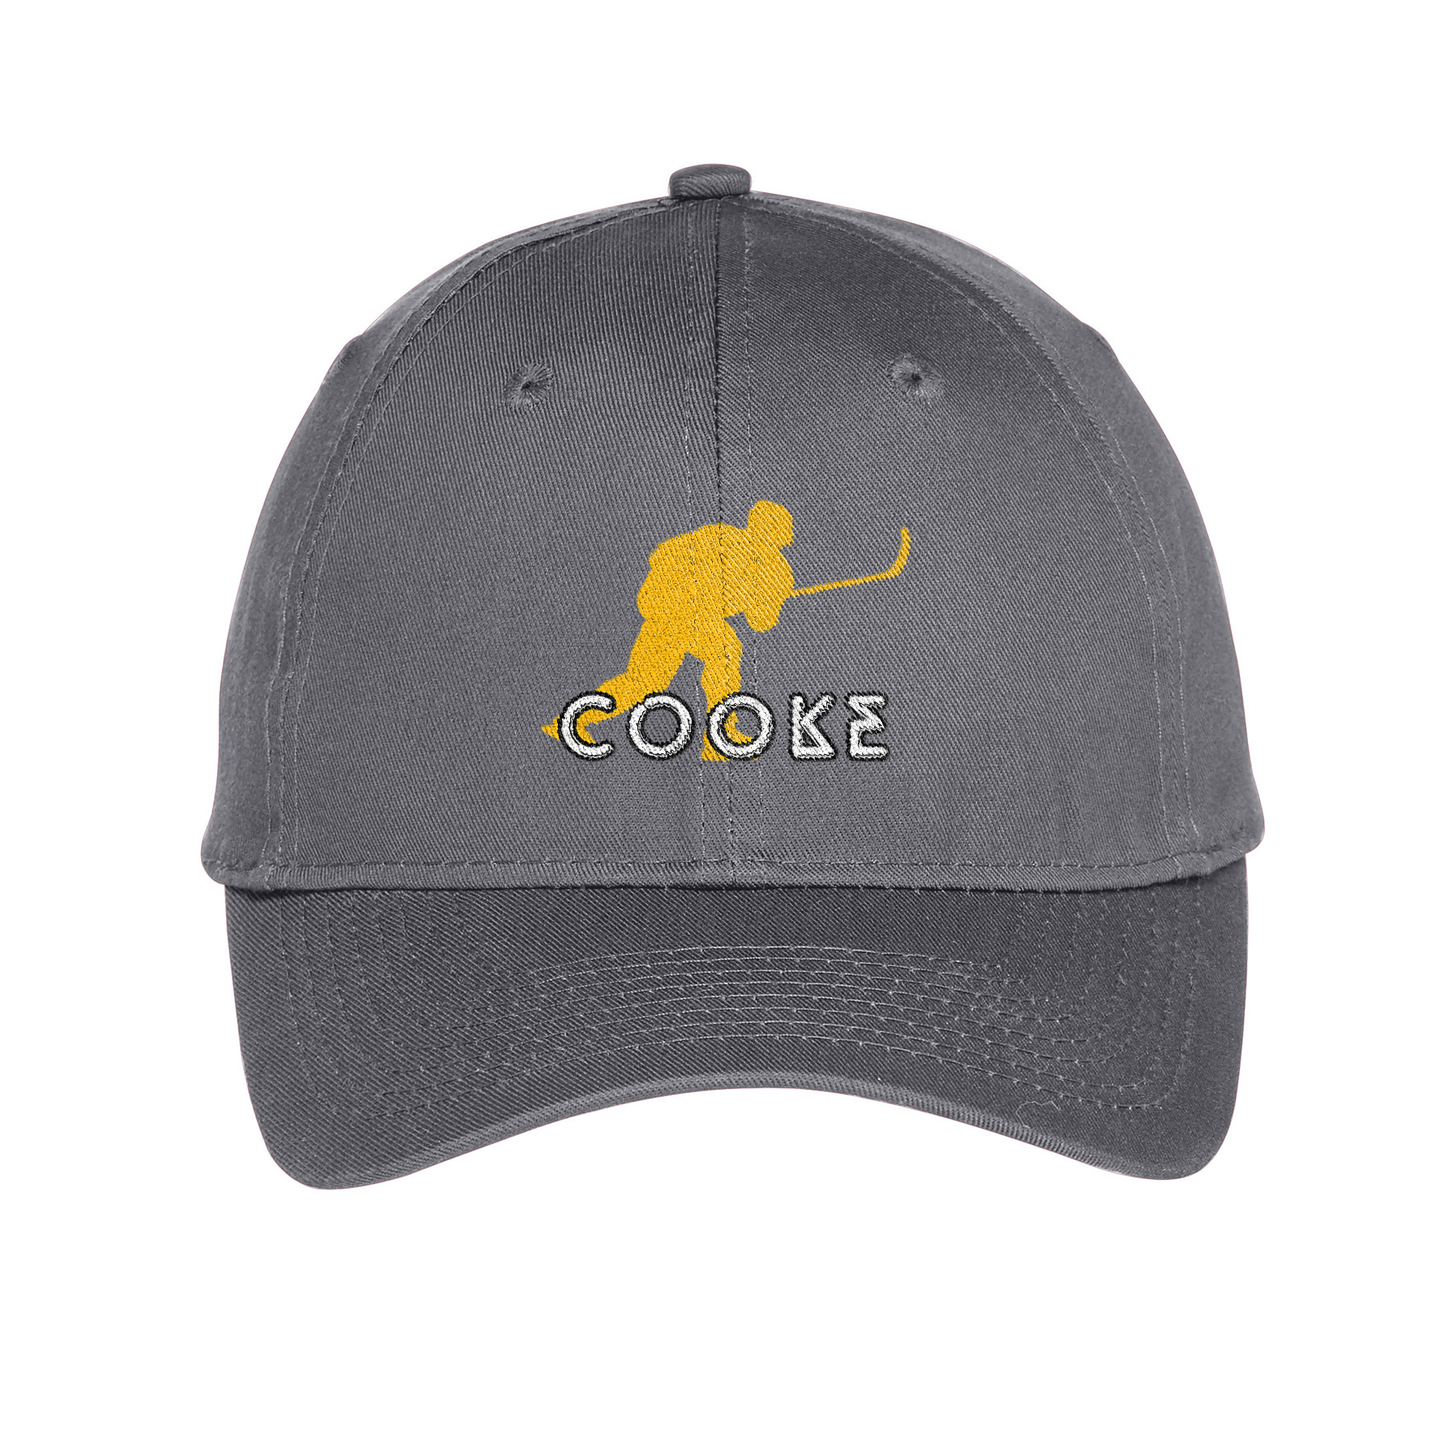 GT Cooke Embroidered Twill Cap